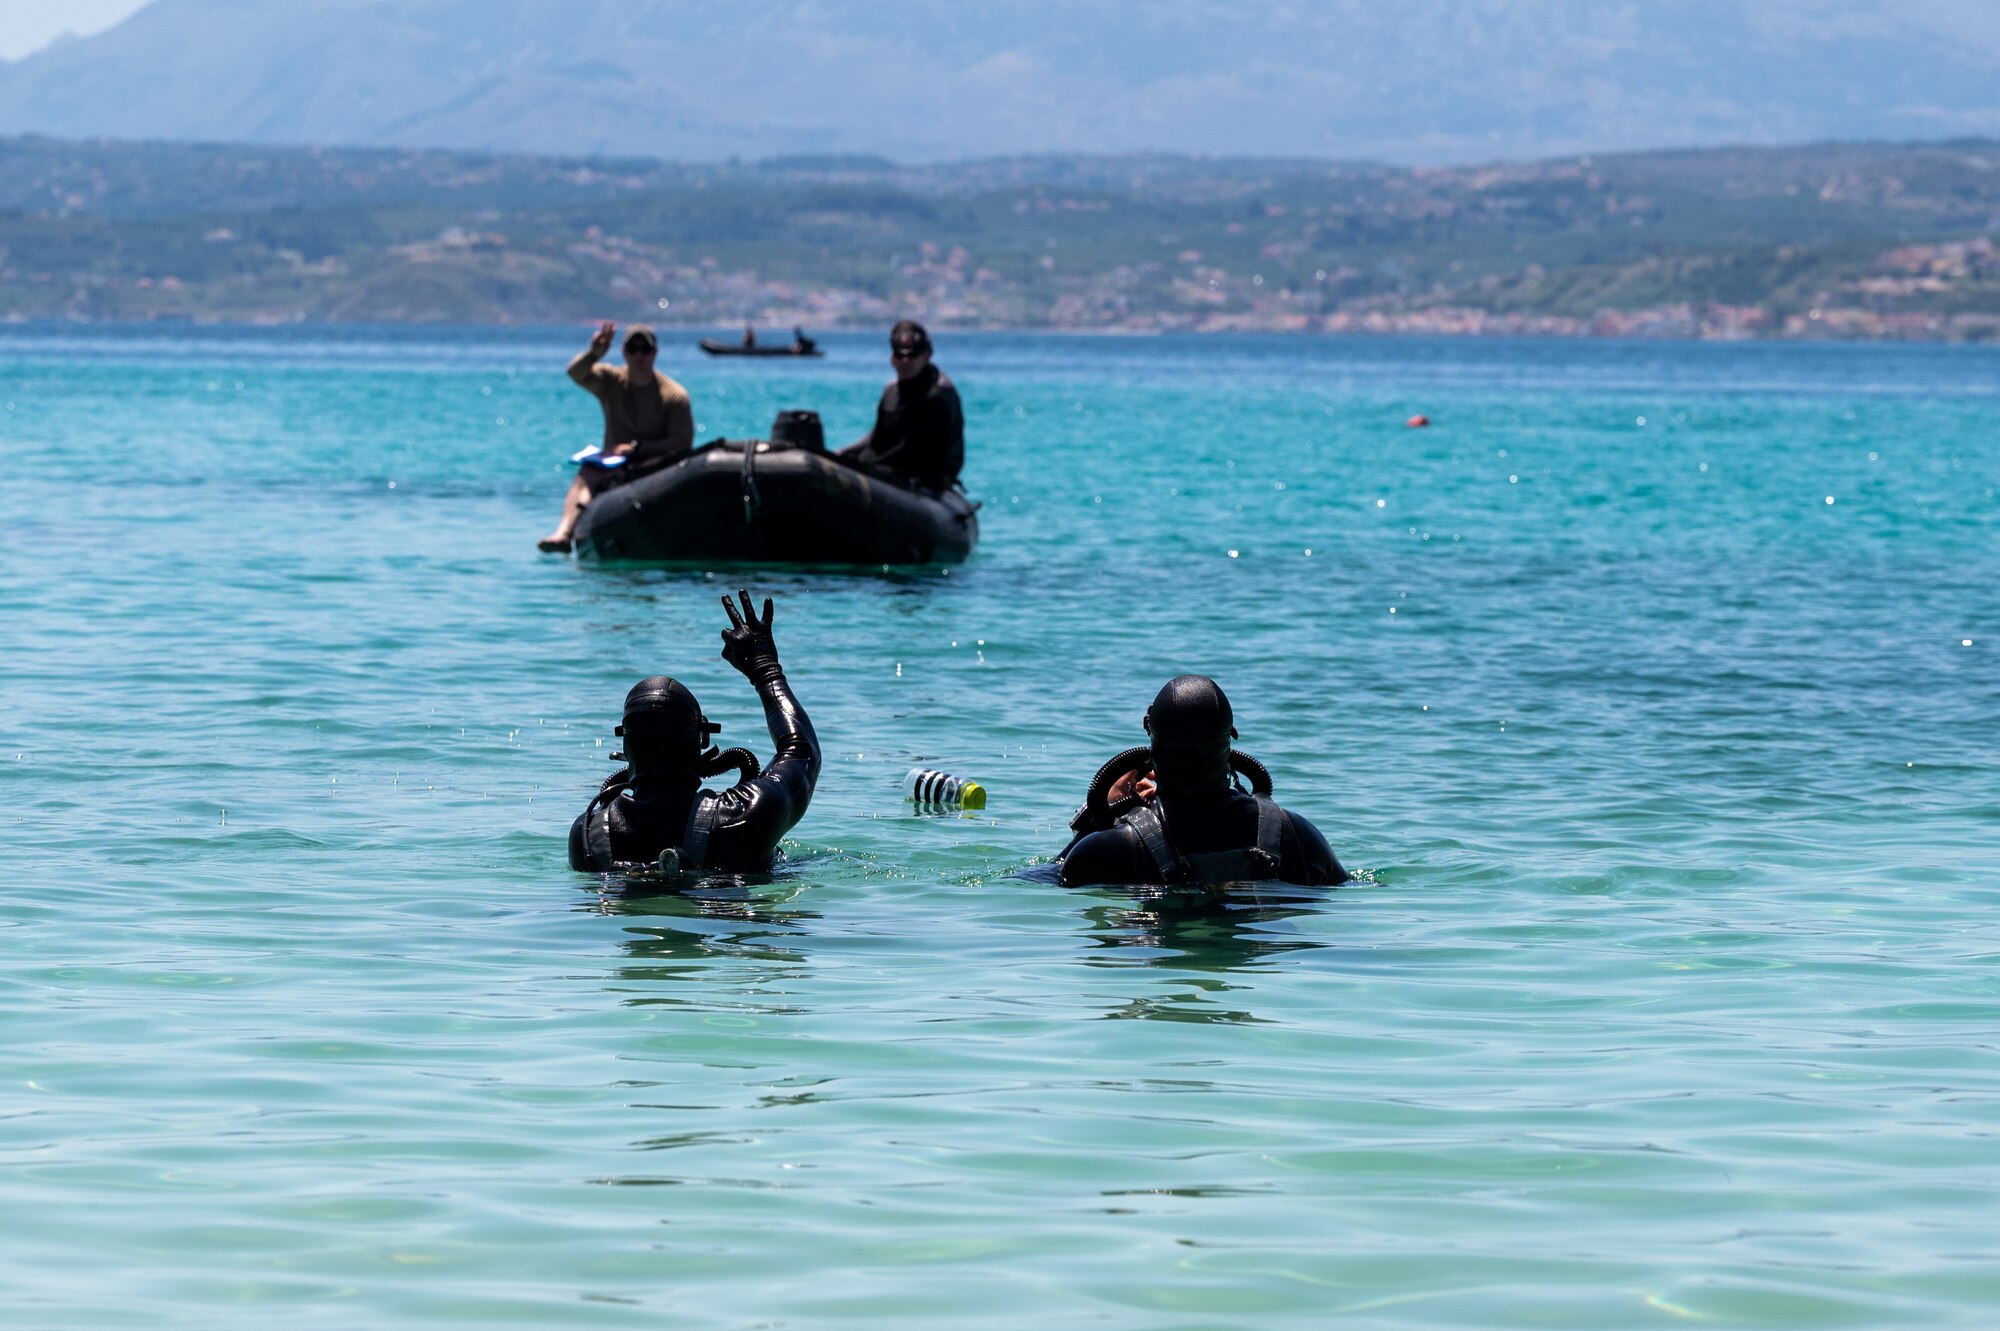 U.S. Navy and Air Force SOF perform joint dive training